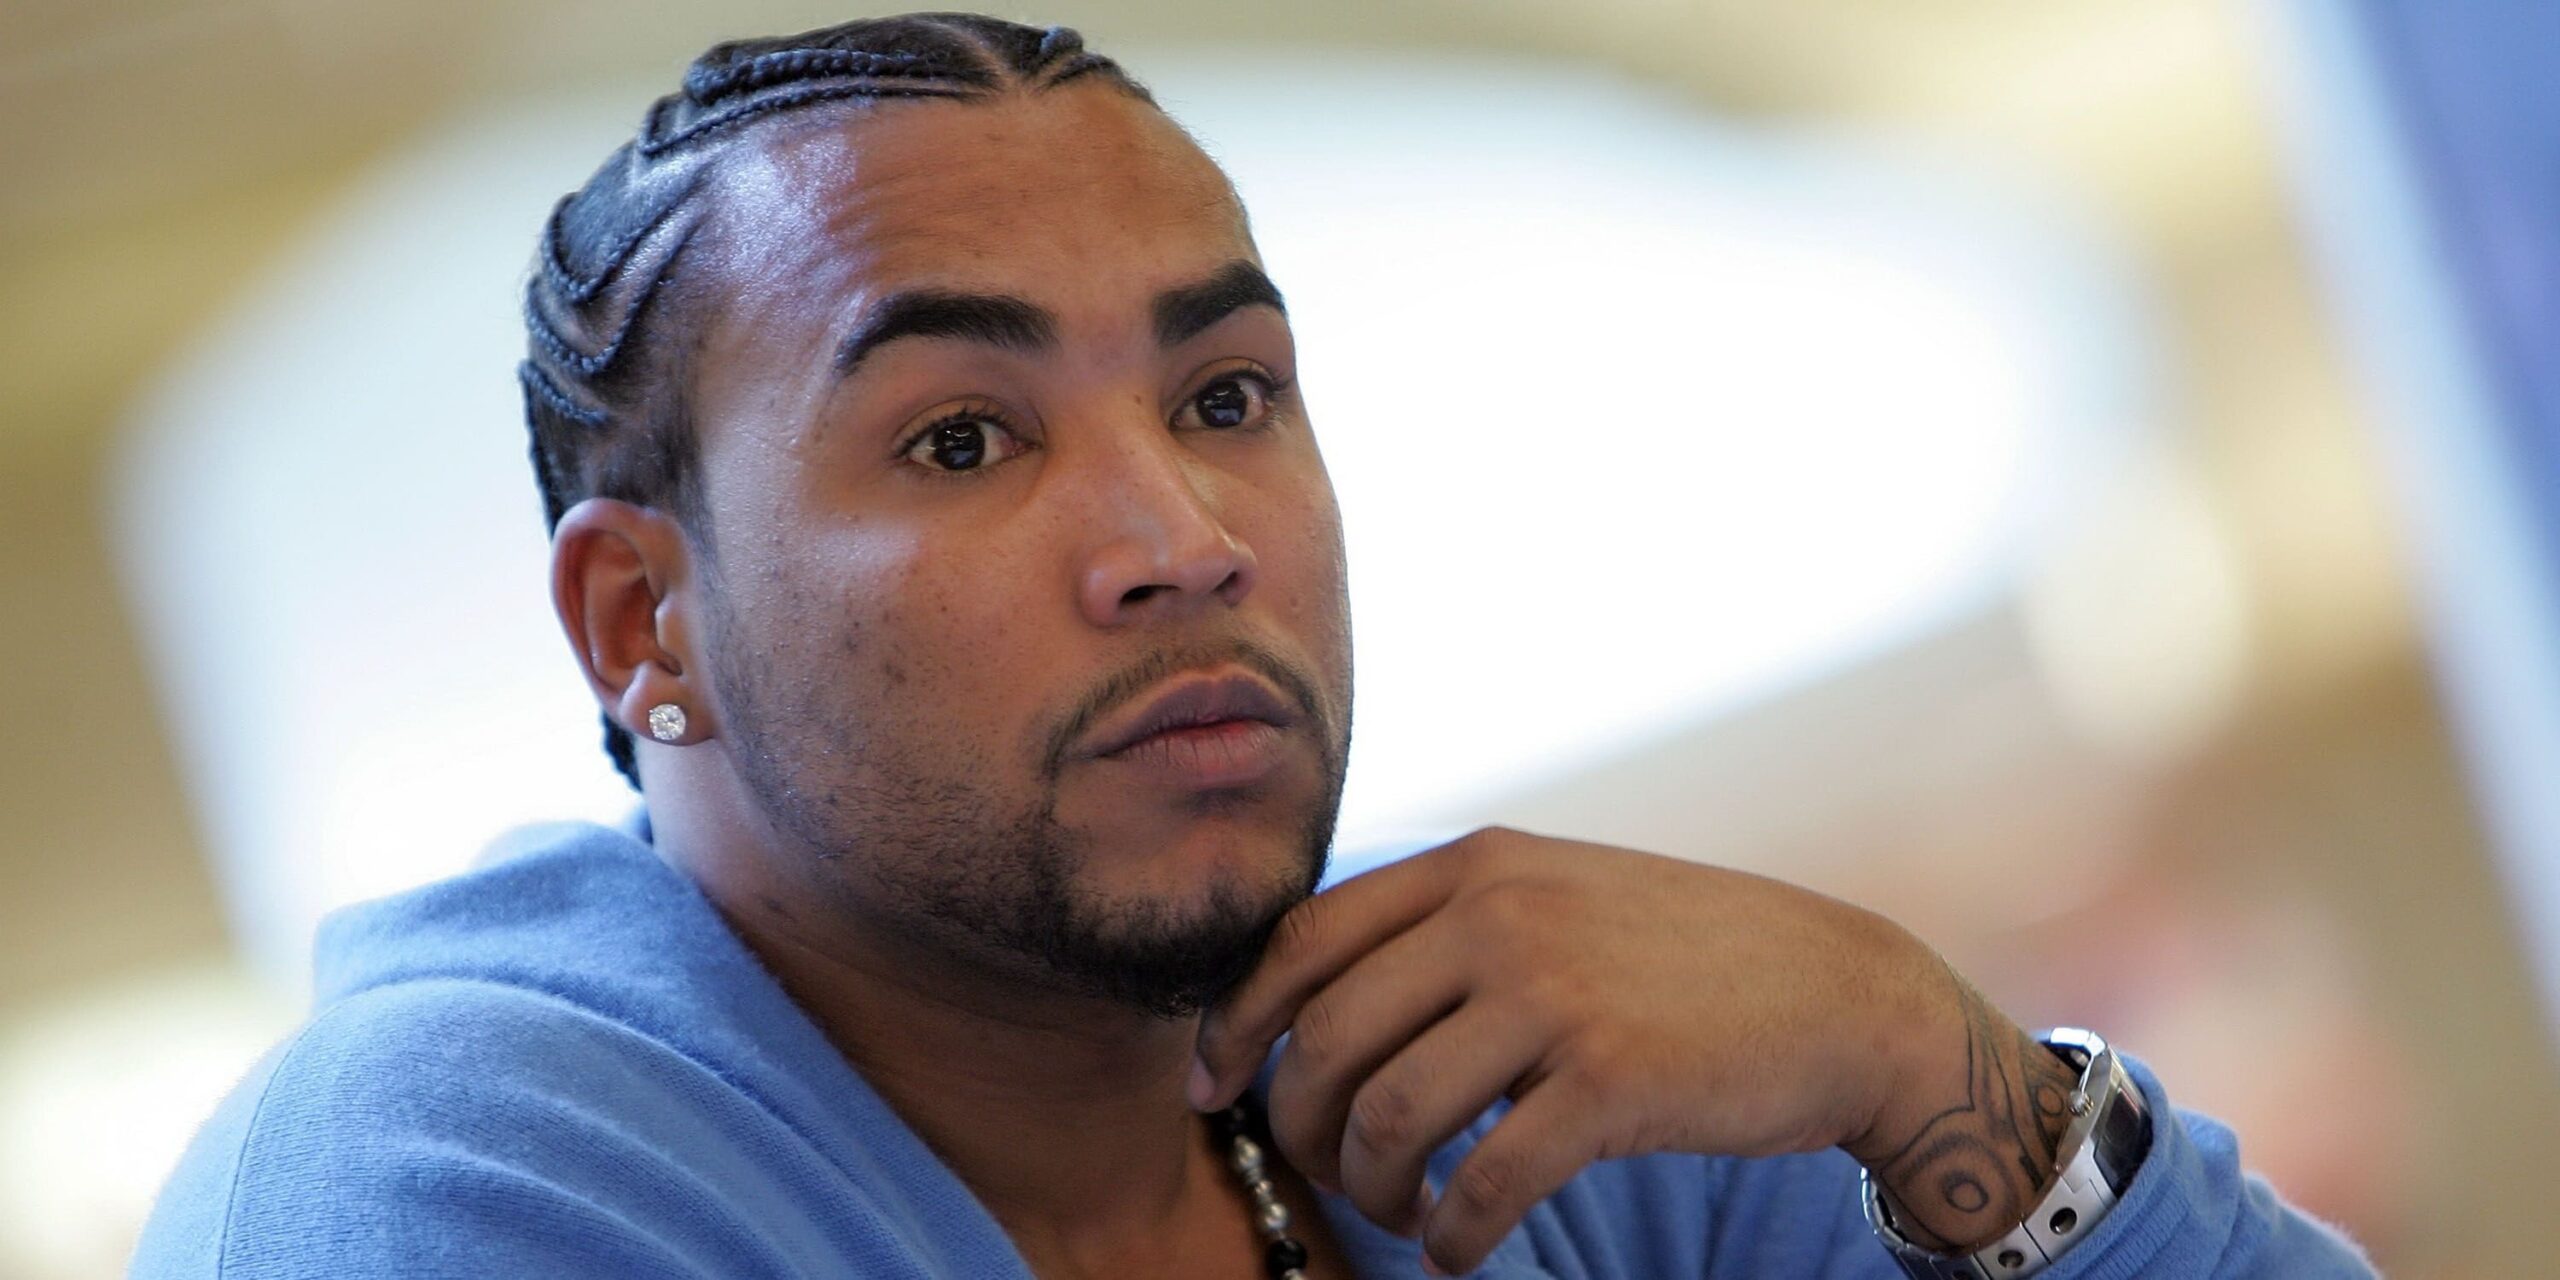  What Is Don omar's Net Worth?